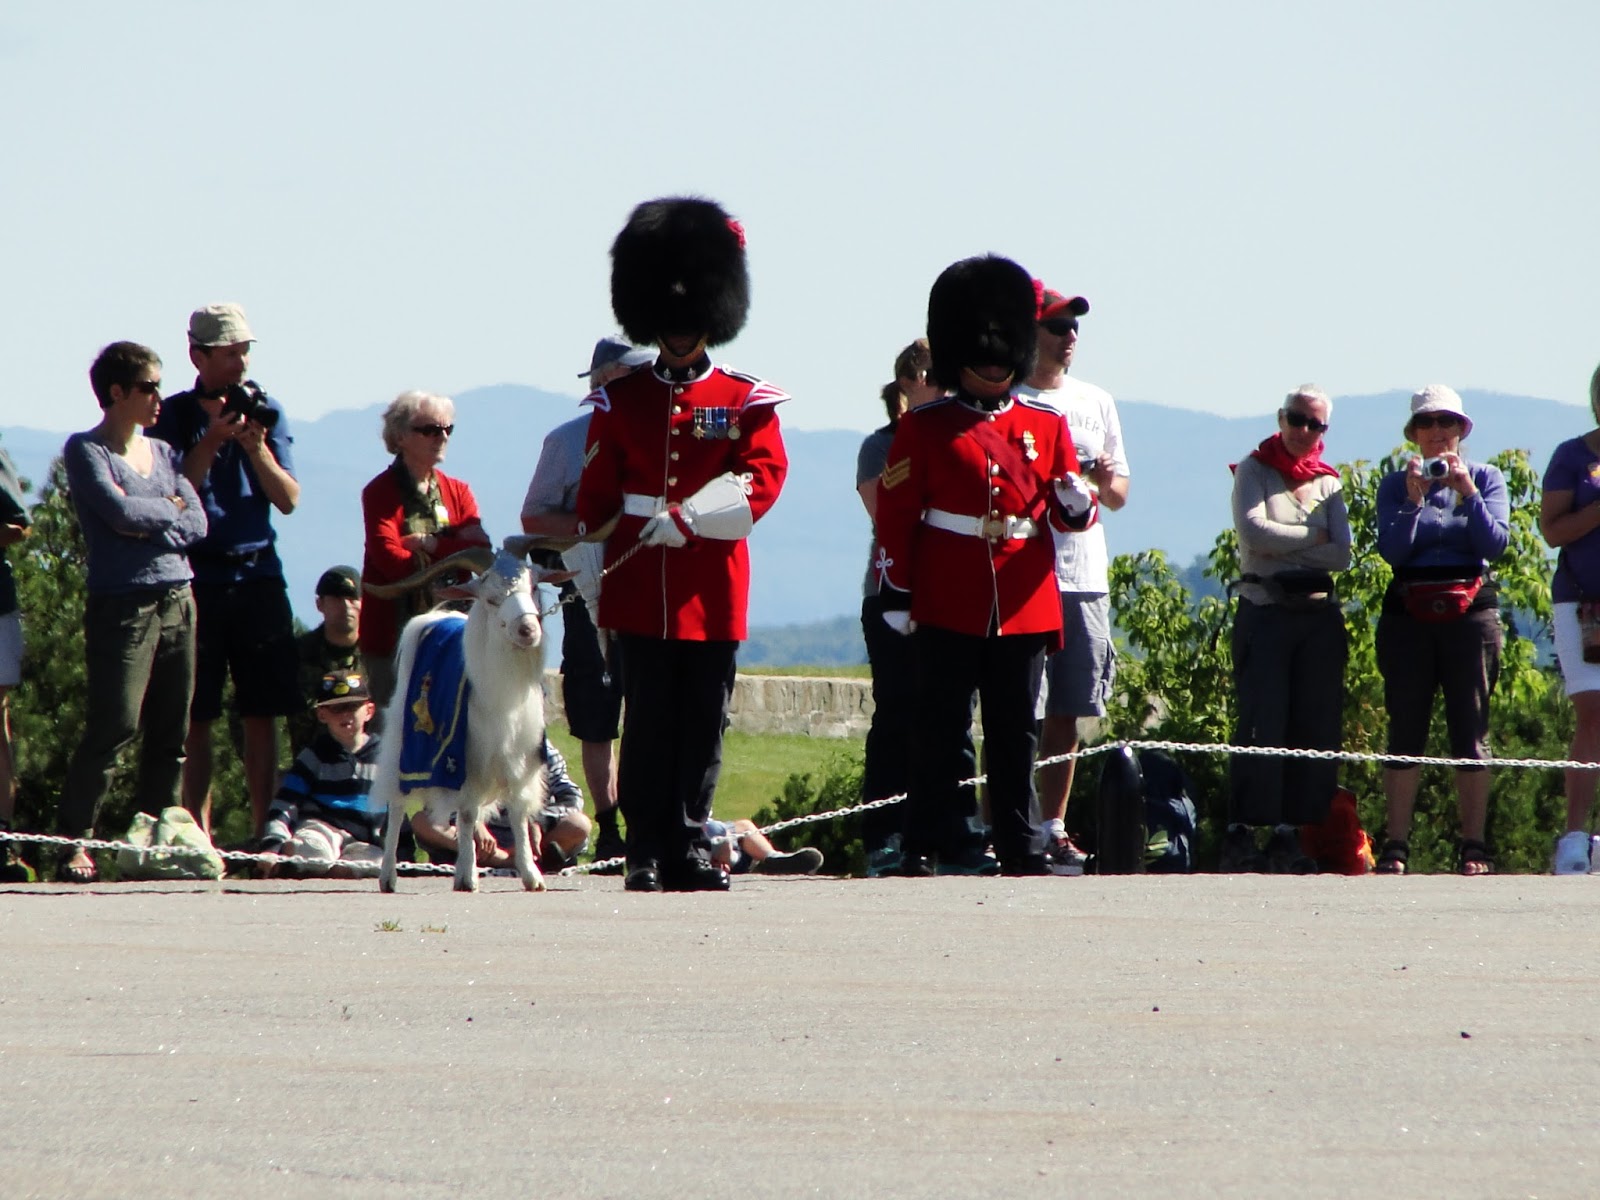 Changing of the Guards - and a goat! From Travel Writers' Secrets: Top Quebec City Travel Tips